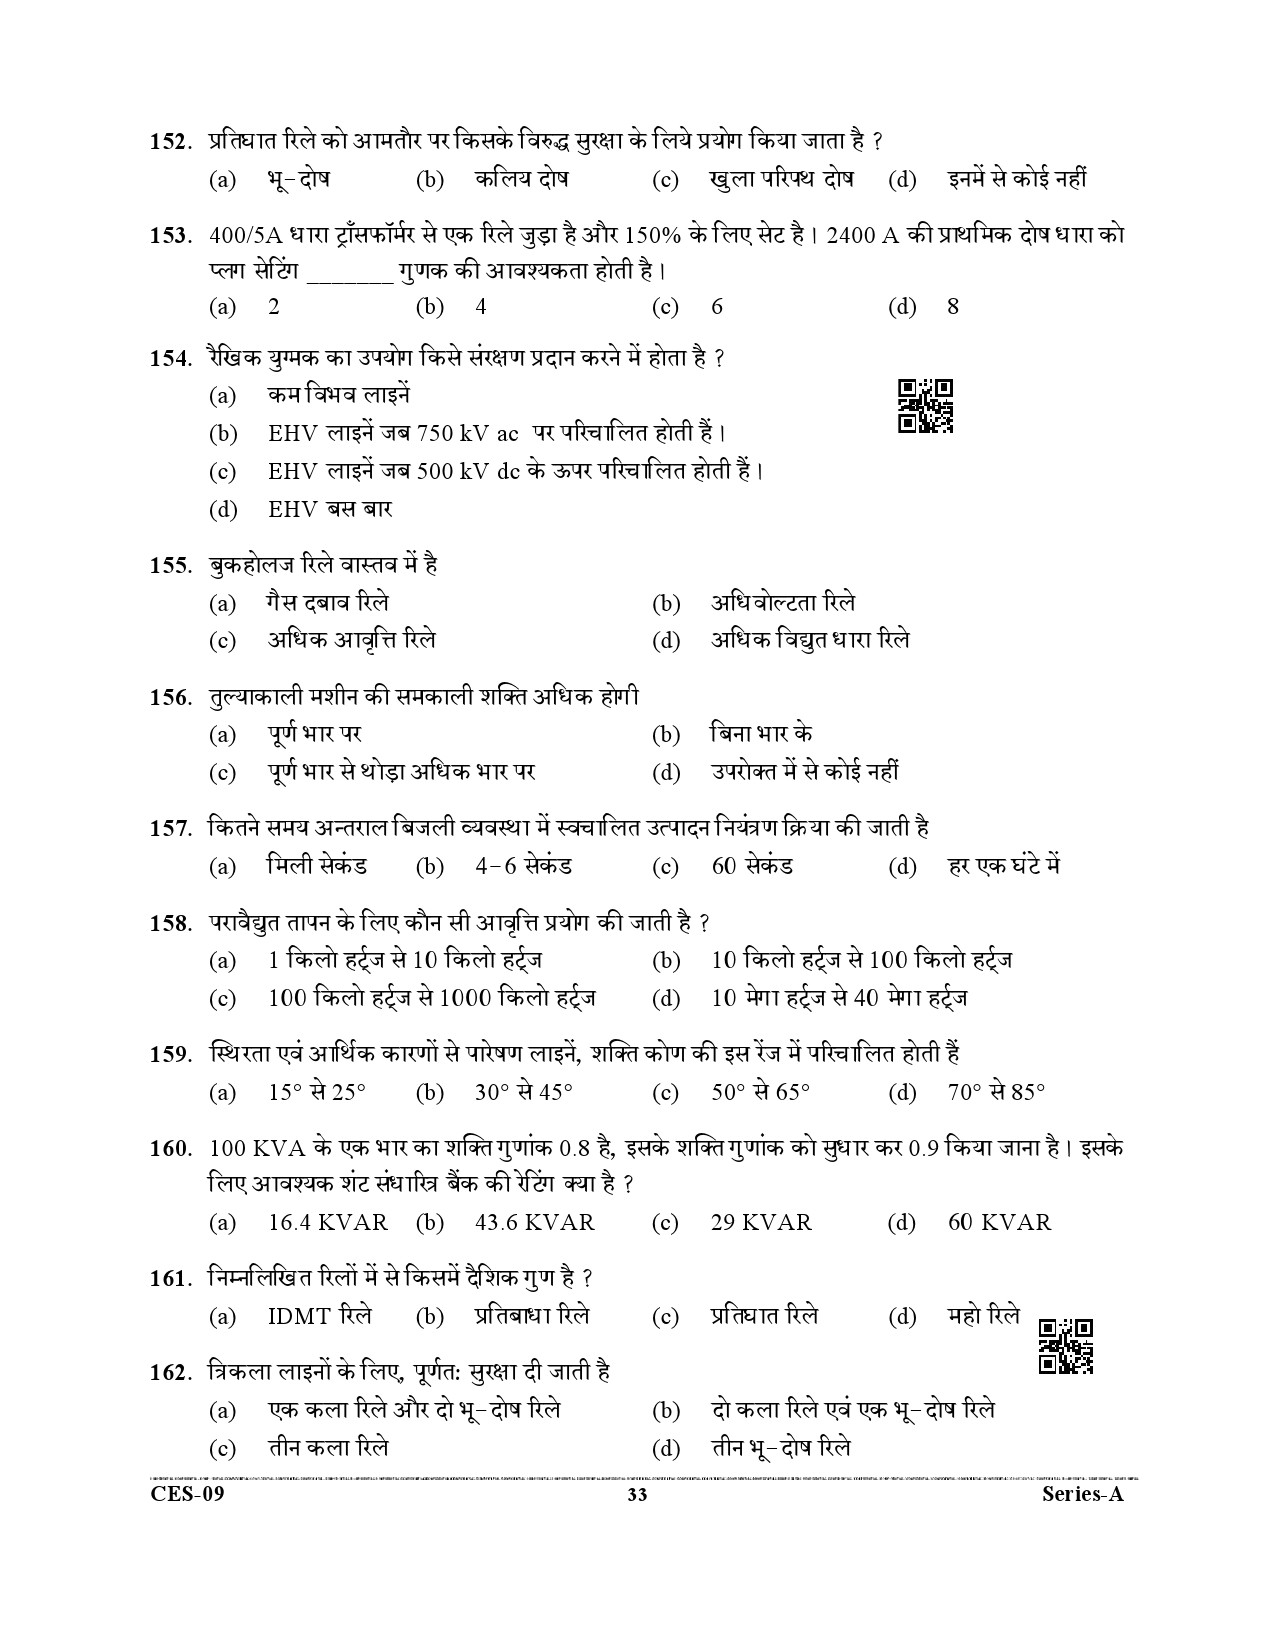 Uttarakhand Combined State Engineering Service Exam 2021 Electrical Engineering Paper II 33